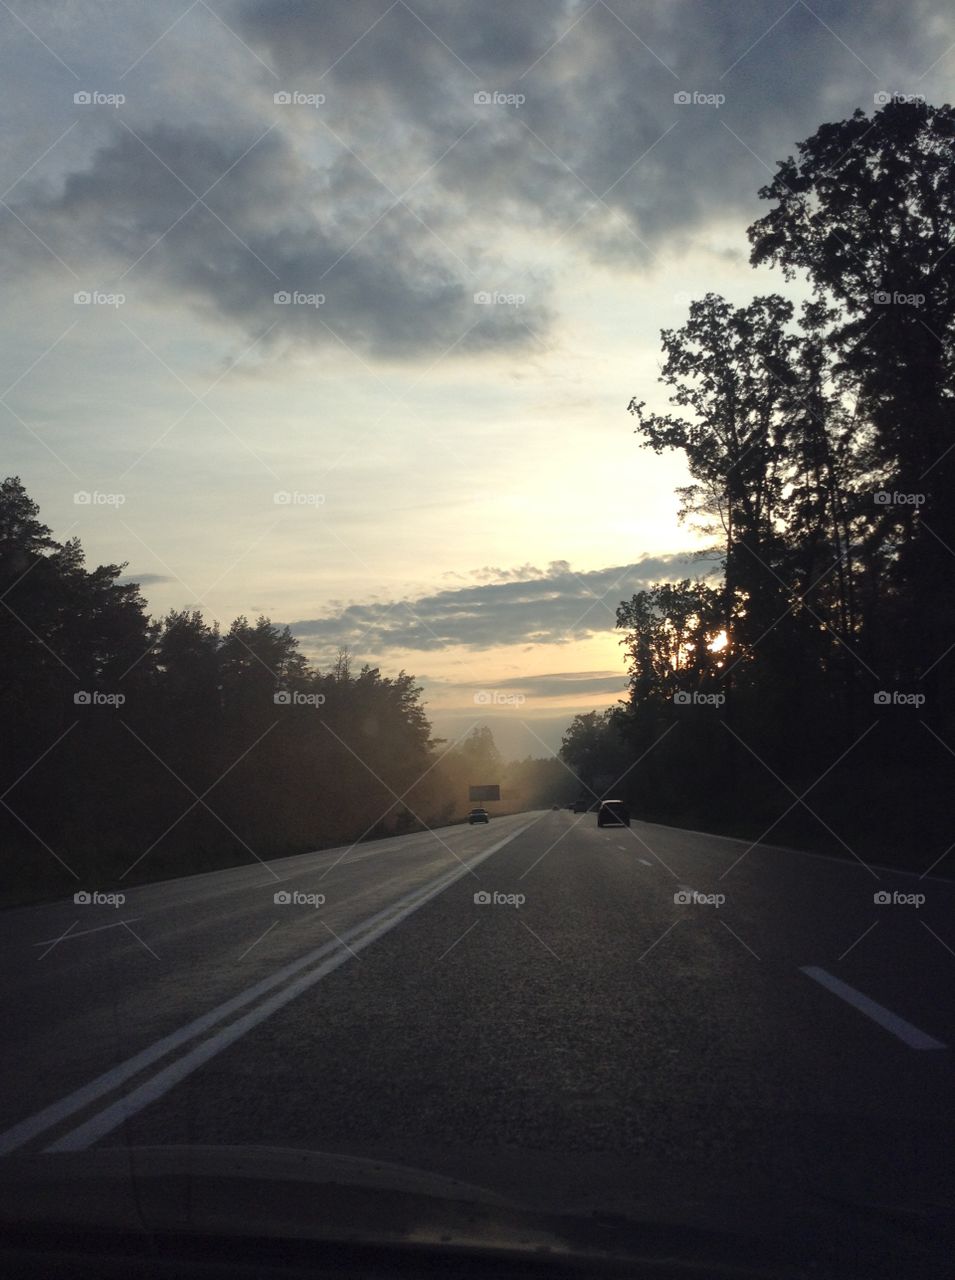 Sunset in the road